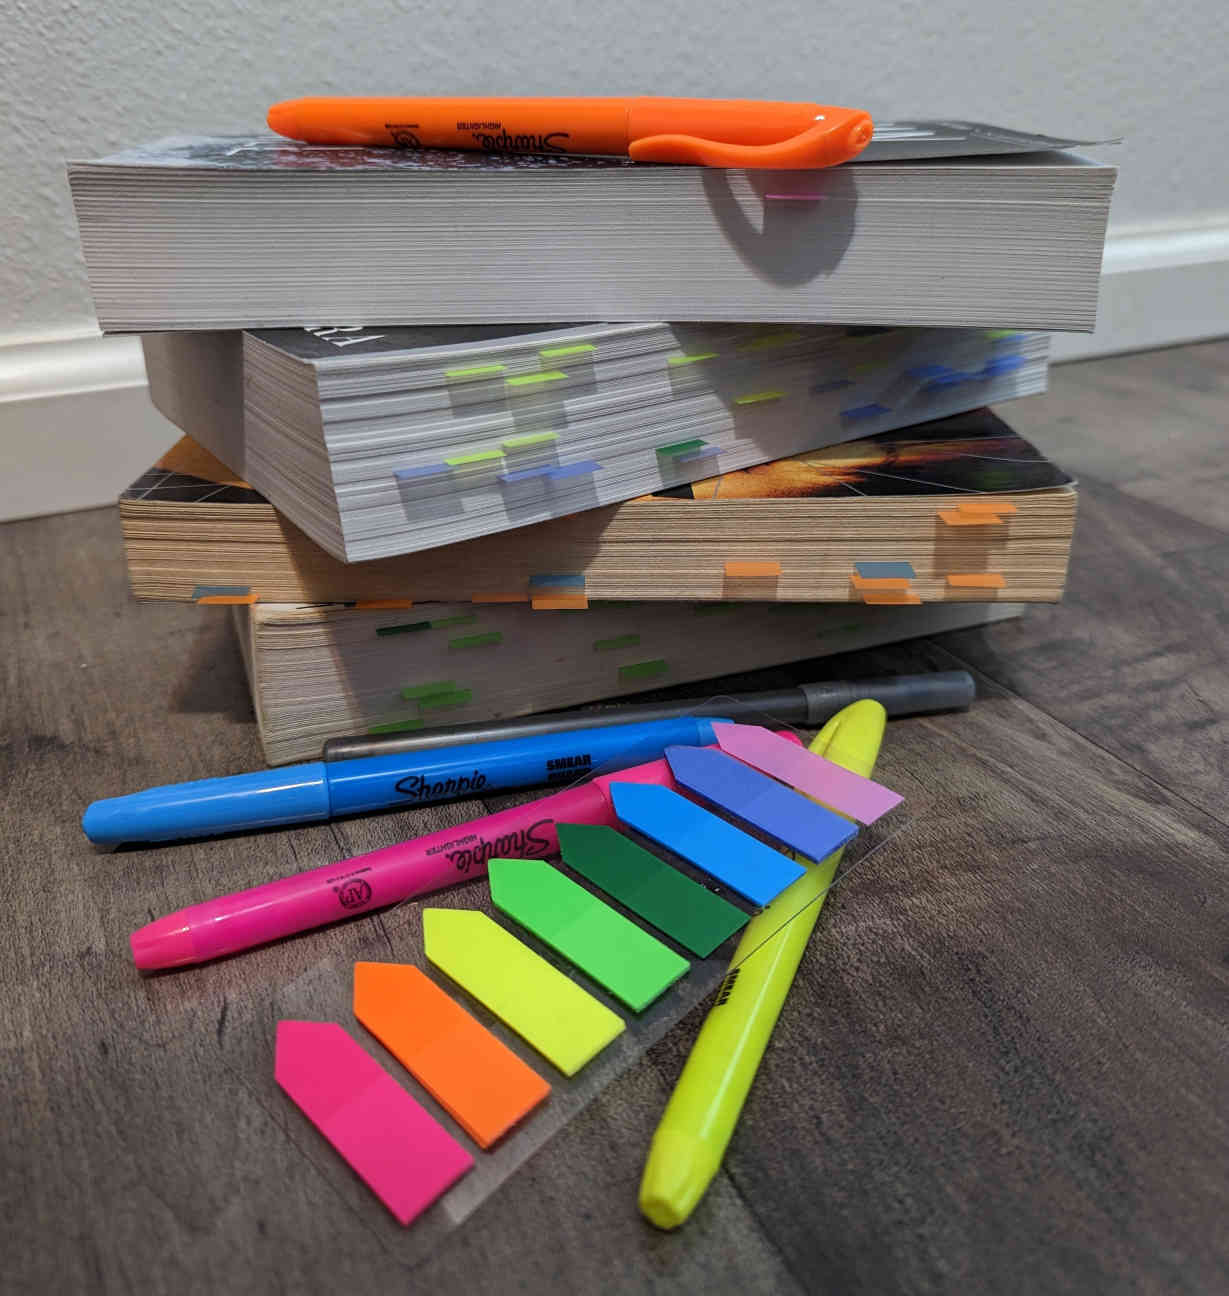 A stack of well-loved books with highlighters and sticky notes nearby.